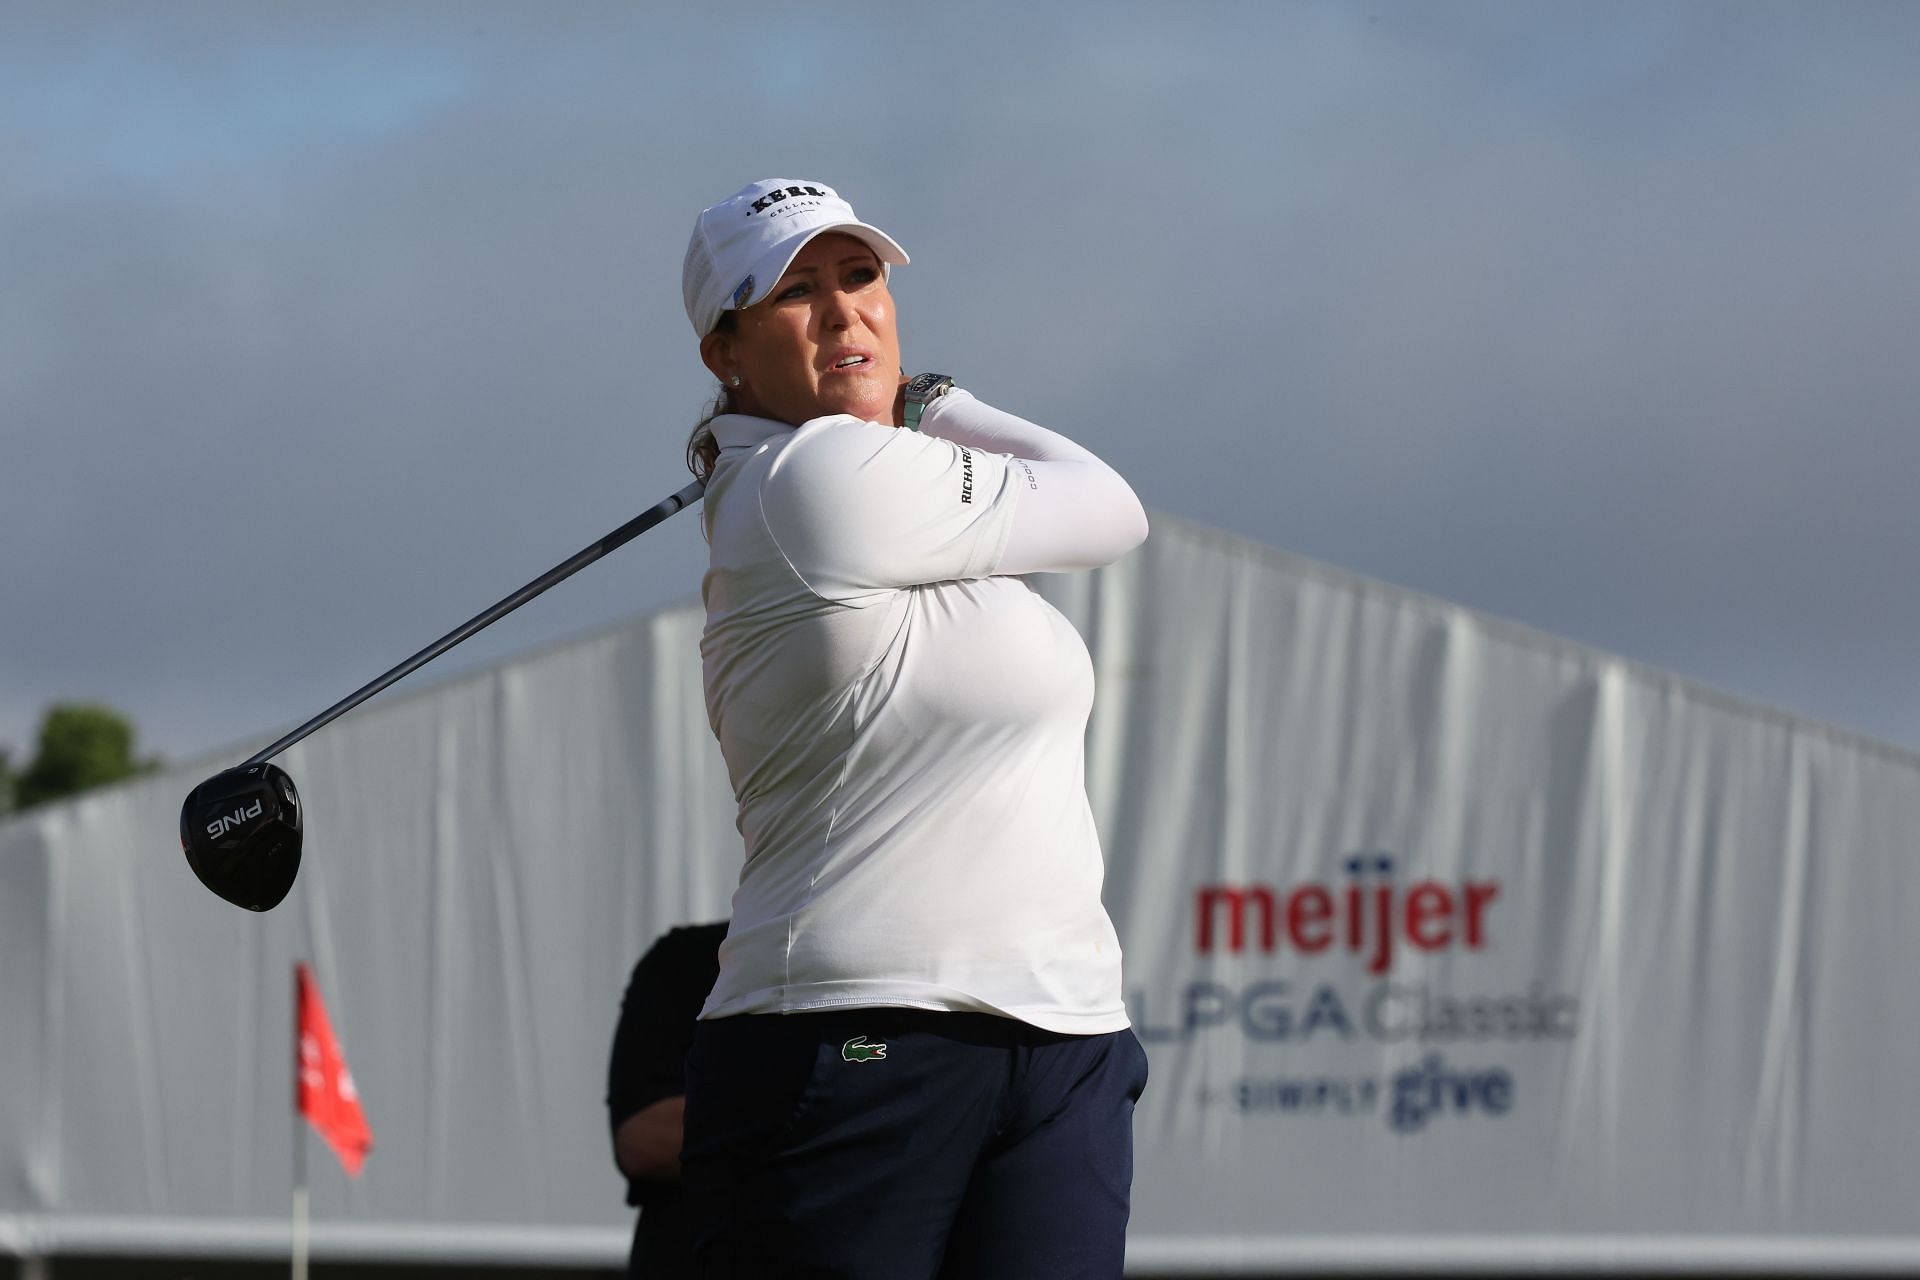 Christie Kerr at the Meijer LPGA Classic for Simply Give - Round One (Image via Rey Del Rio/Getty Images)